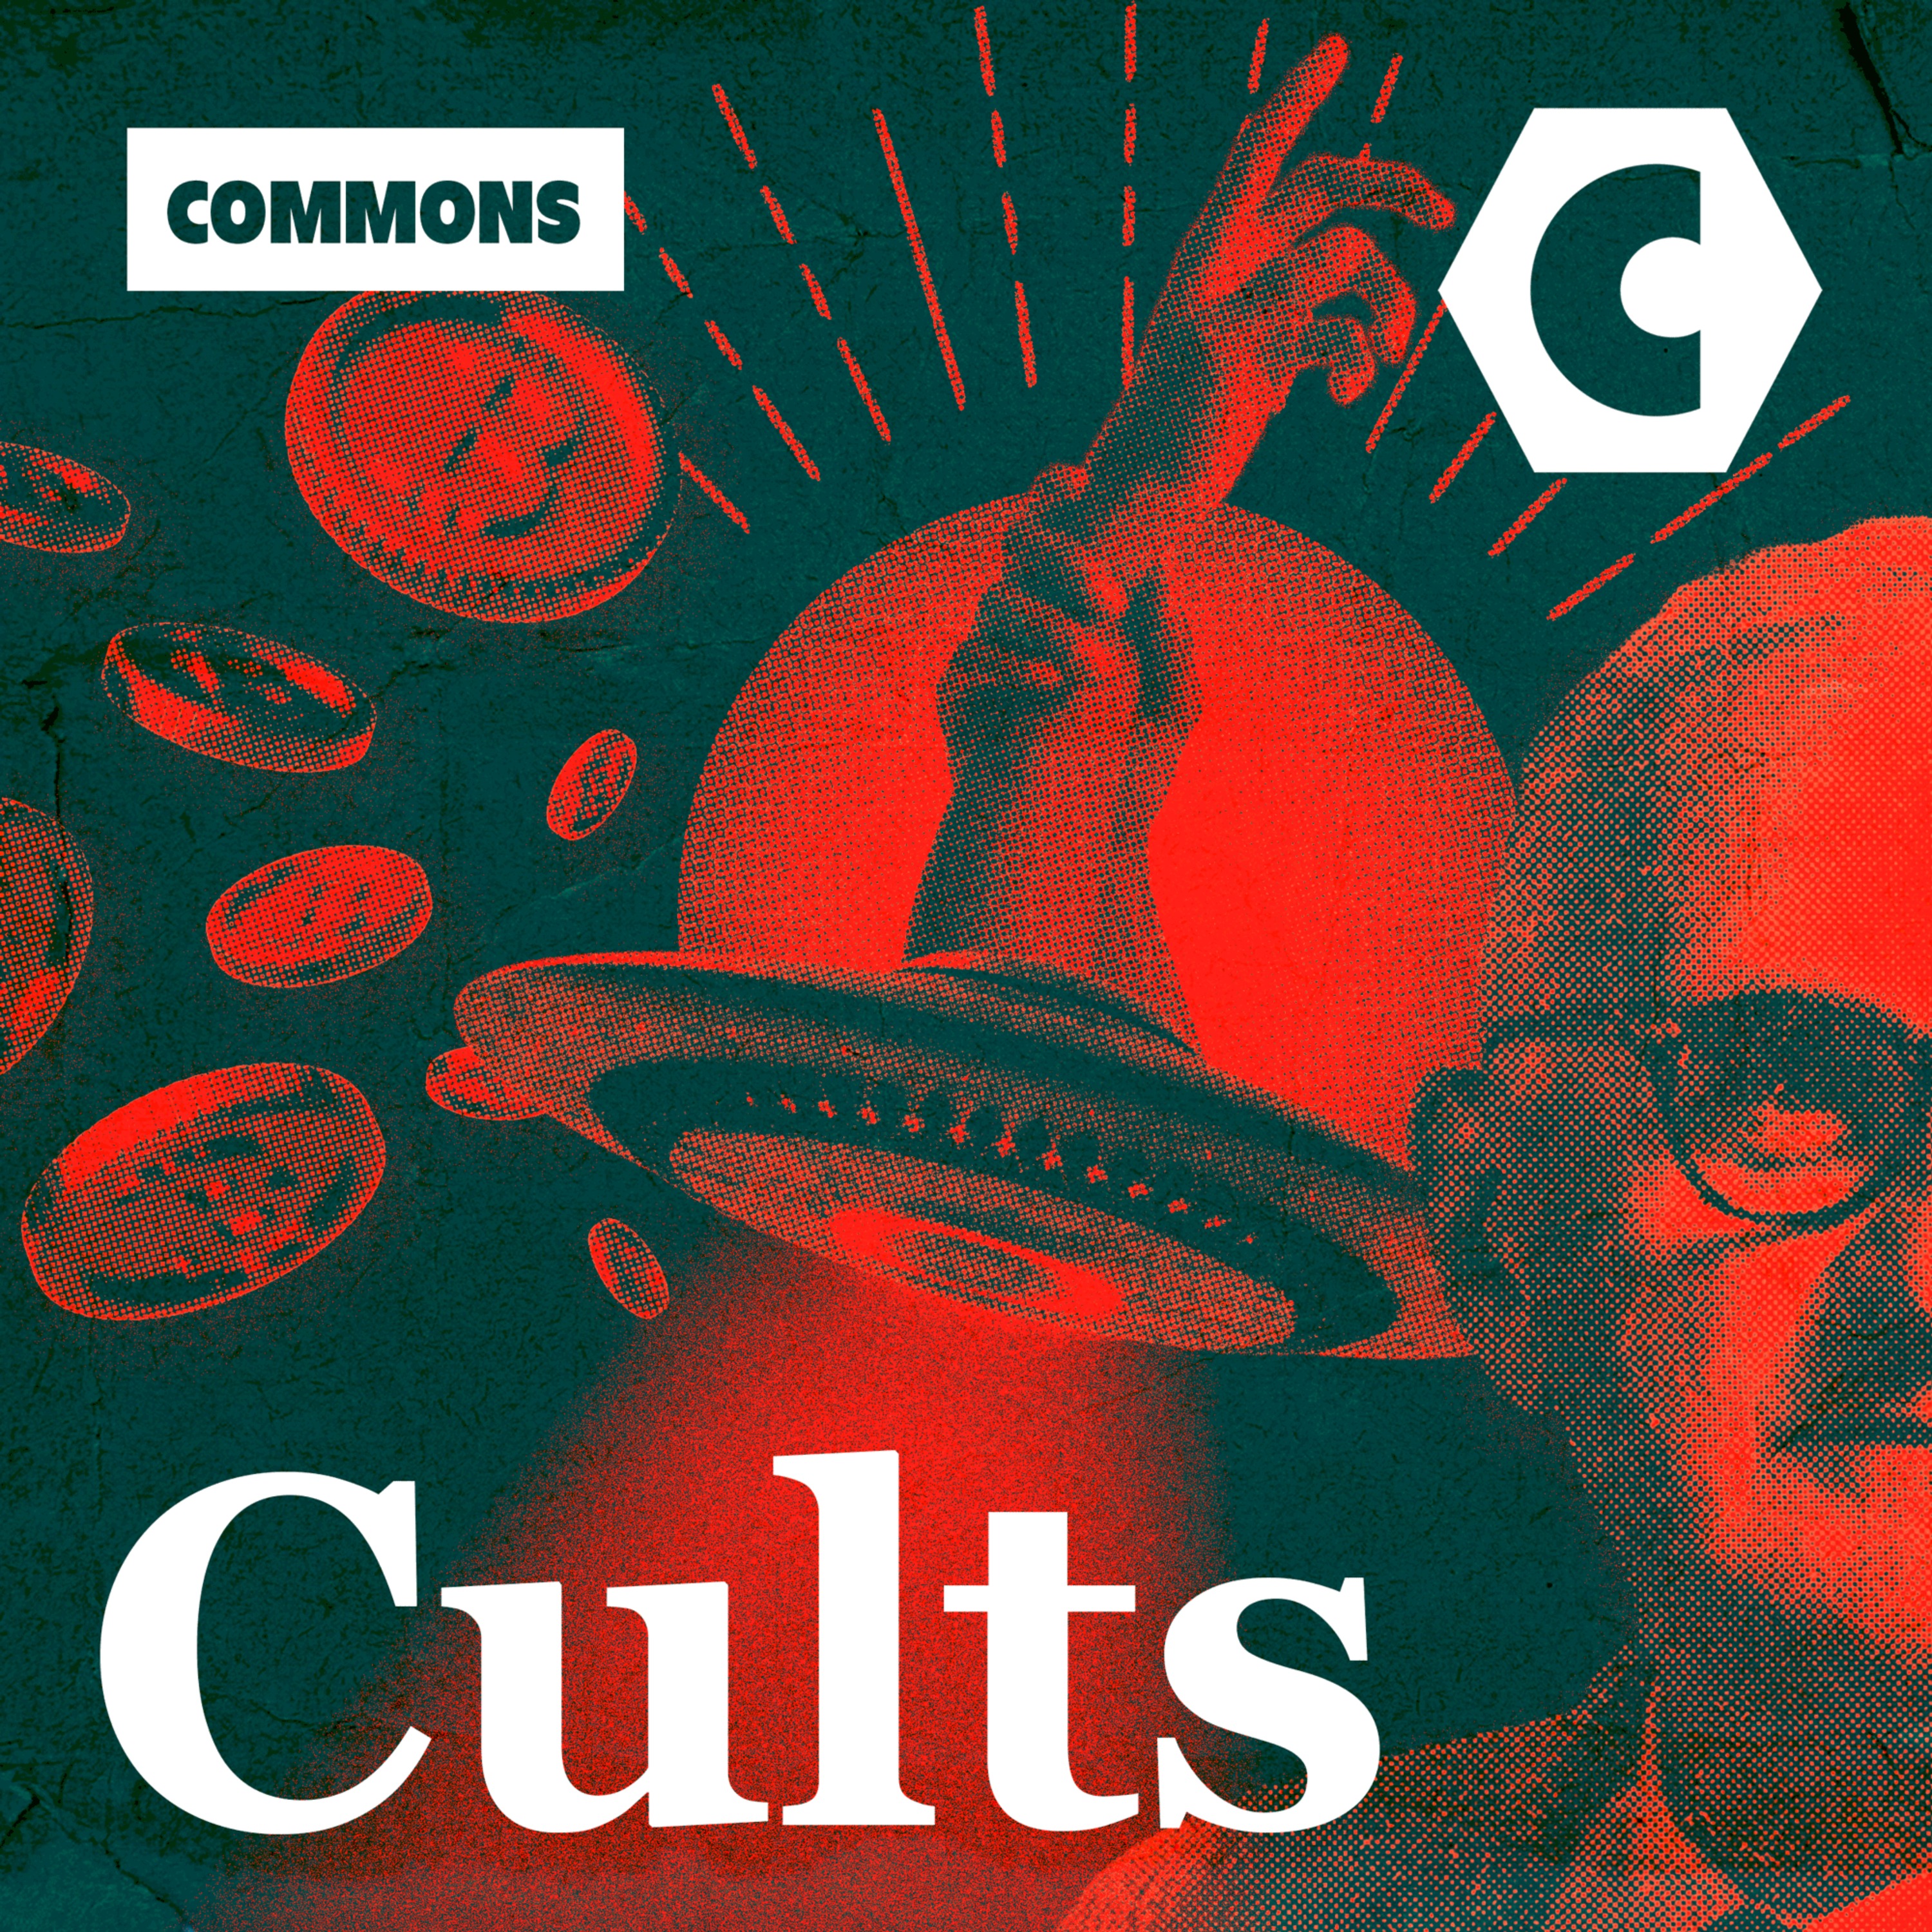 Introducing COMMONS: Cults